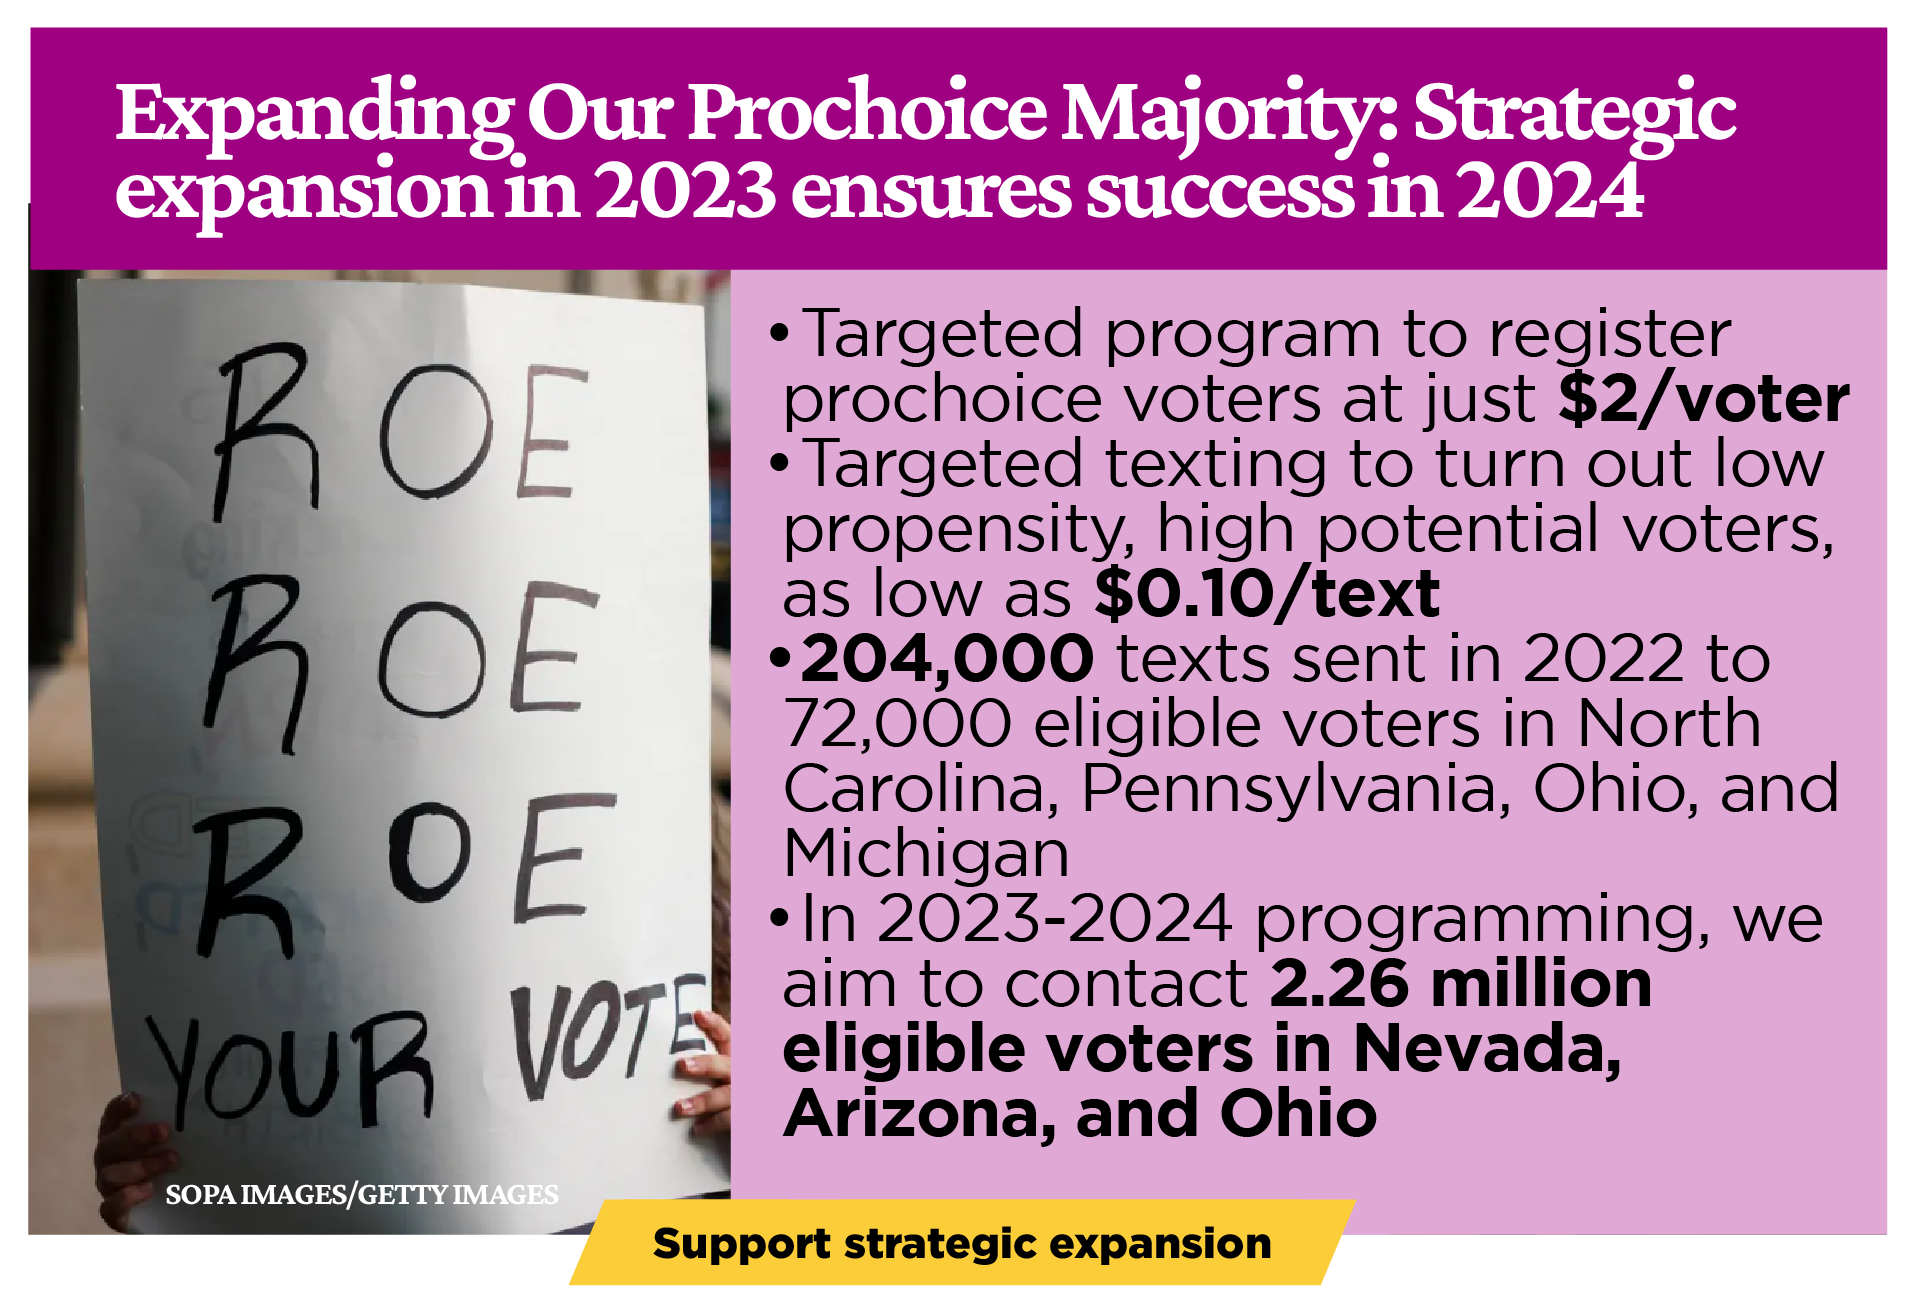  Targeted program to register pro-choice voters at just $2/voter; Targeted texting to turn out low propensity, high potential voters, as low as $0.10/text; 204,000 texts sent in 2022 to 72,000 eligible voters in North Carolina, Pennsylvania, Ohio, and Michigan; In 2023-2024 programming, we aim to contact 2.26 million eligible voters in Nevada, Arizona, and Ohio.